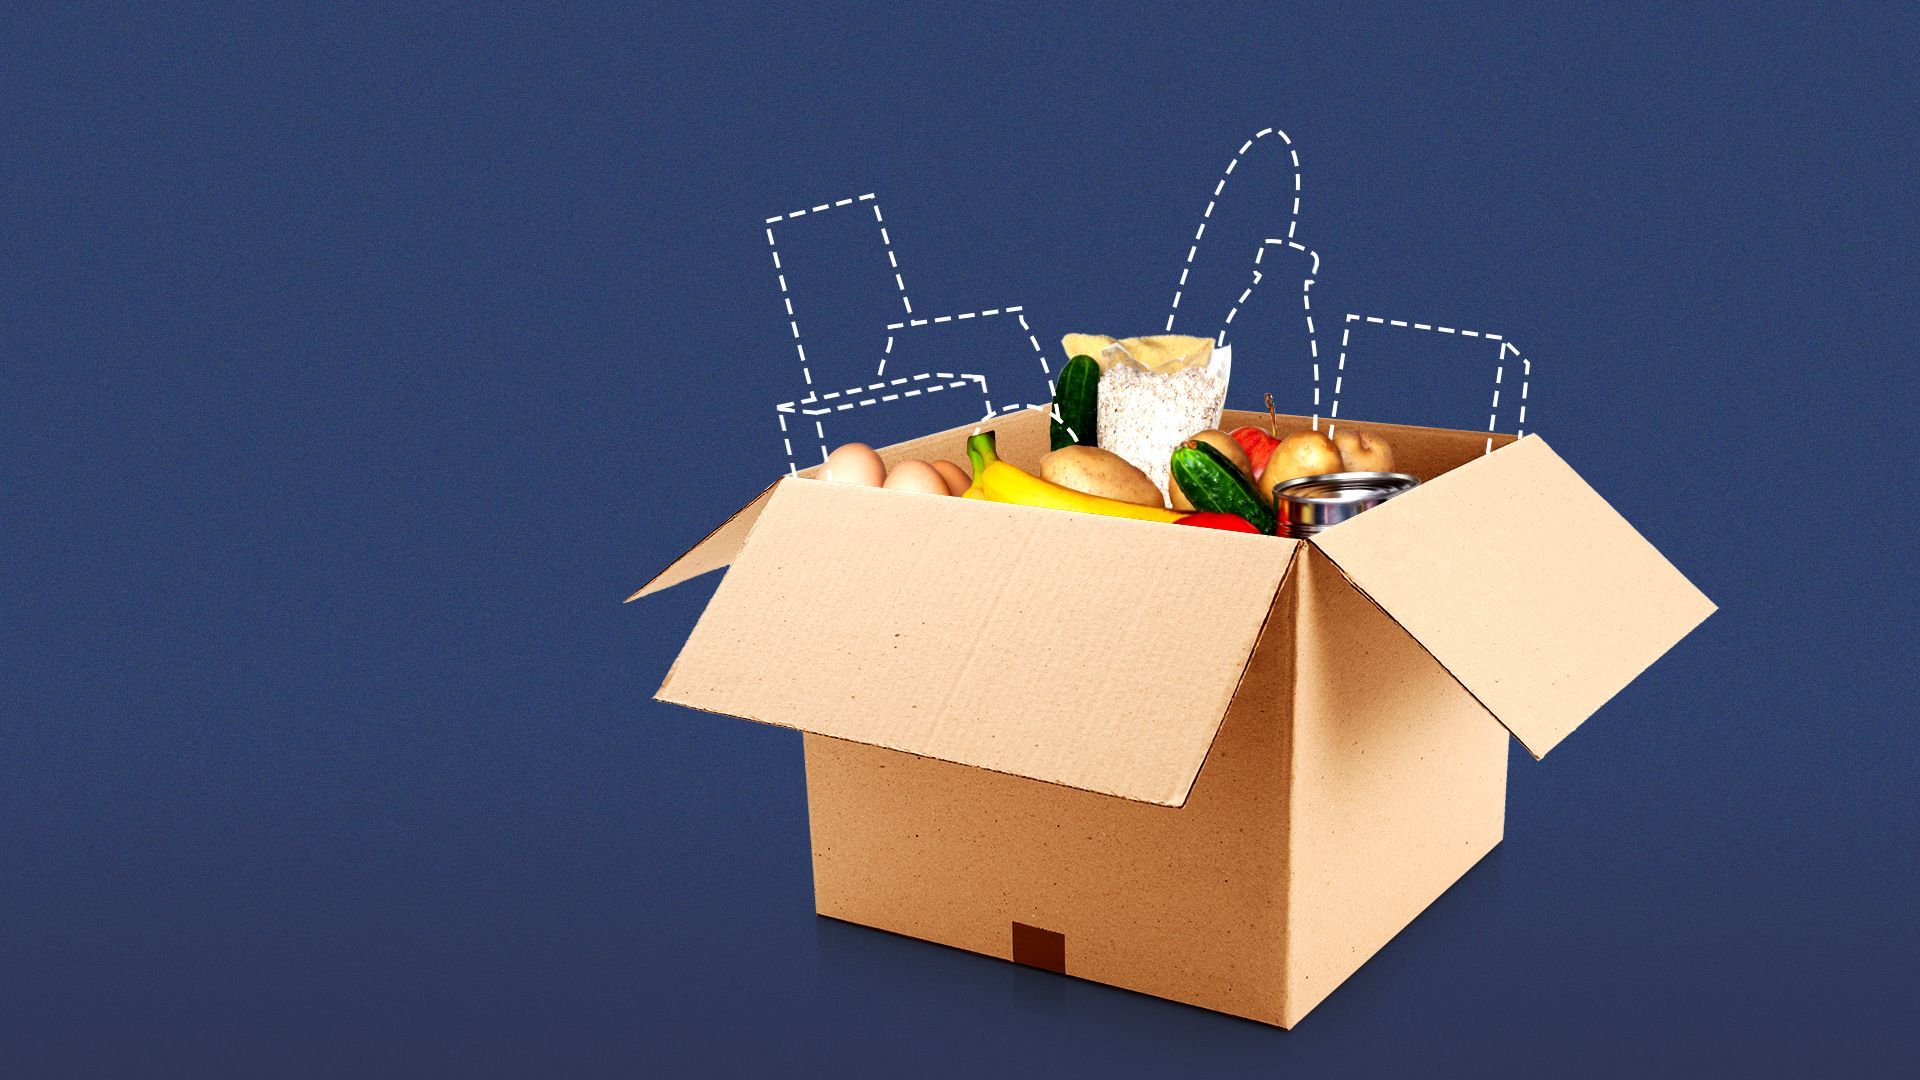 Illustration of a box that contains some food and dotted outlines of food that is missing. 